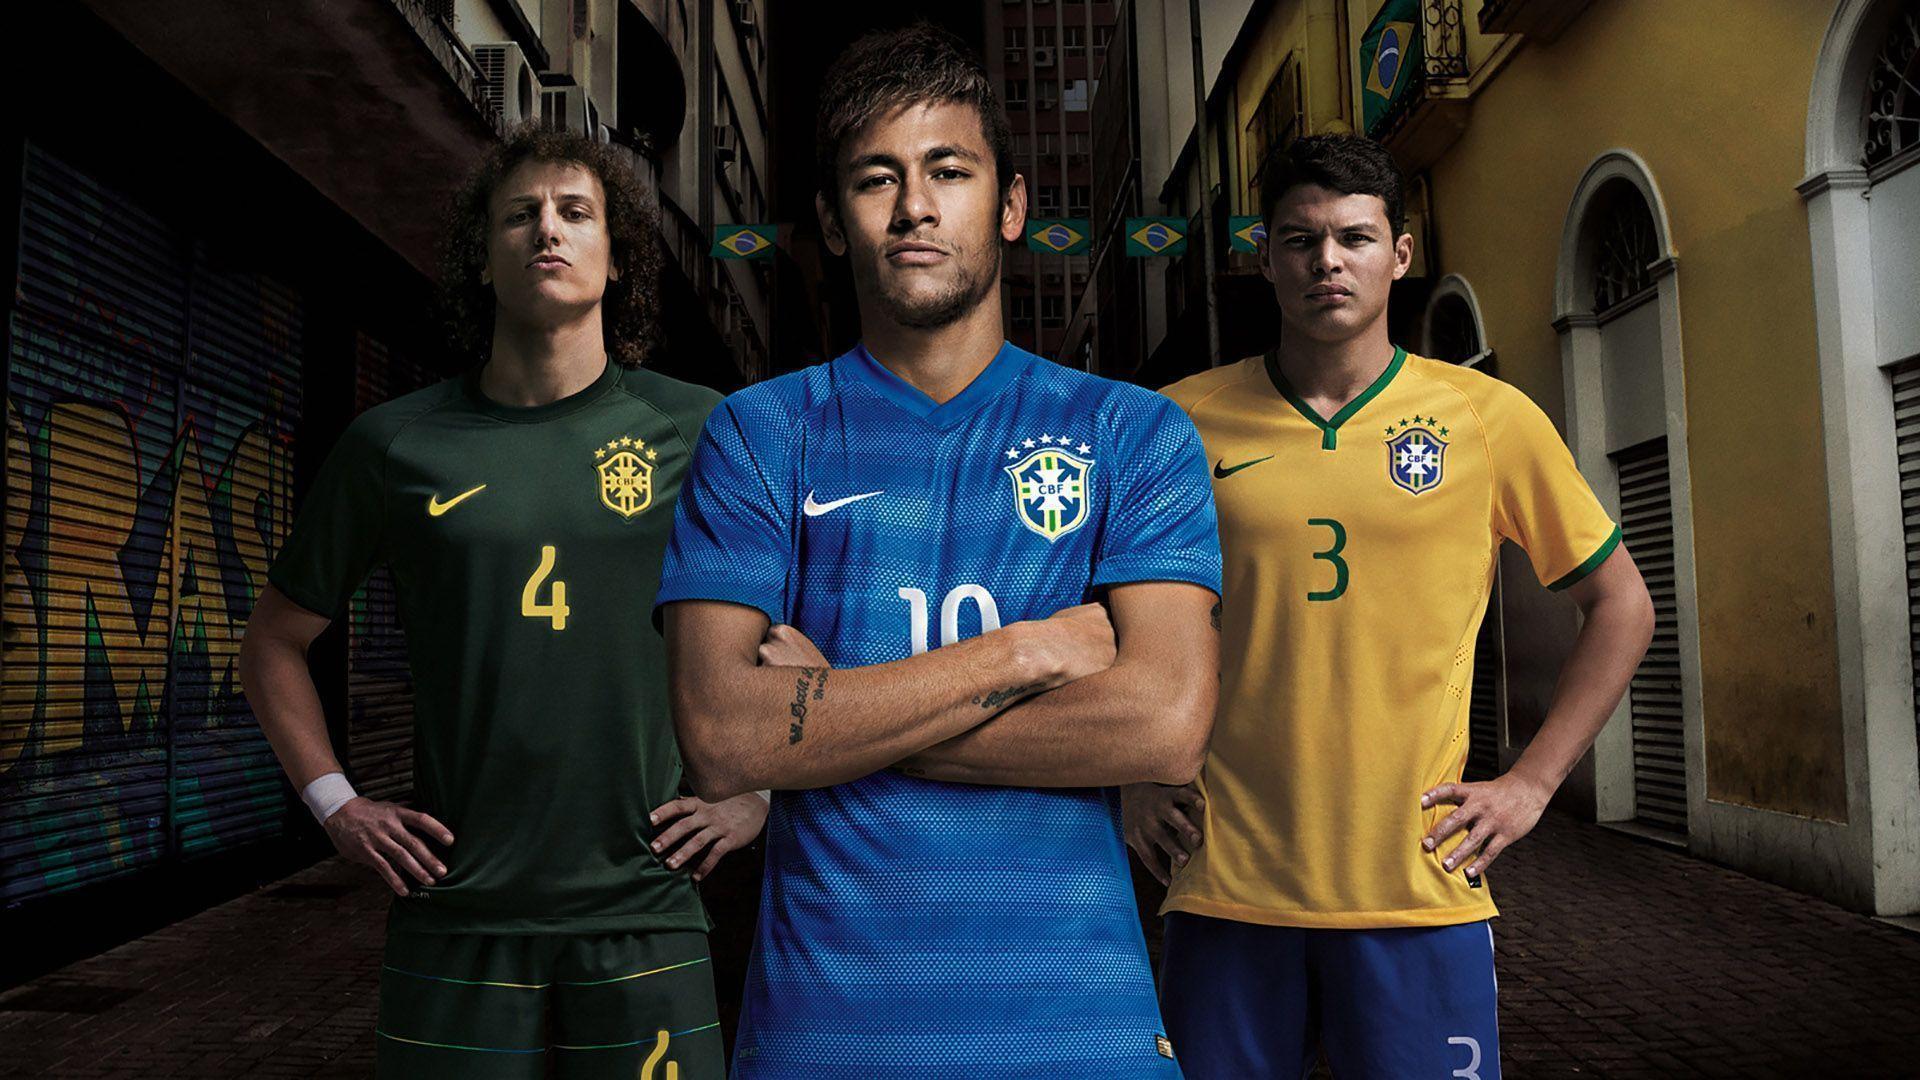 Brazil World Cup football kit 2014 picture for wallpaper